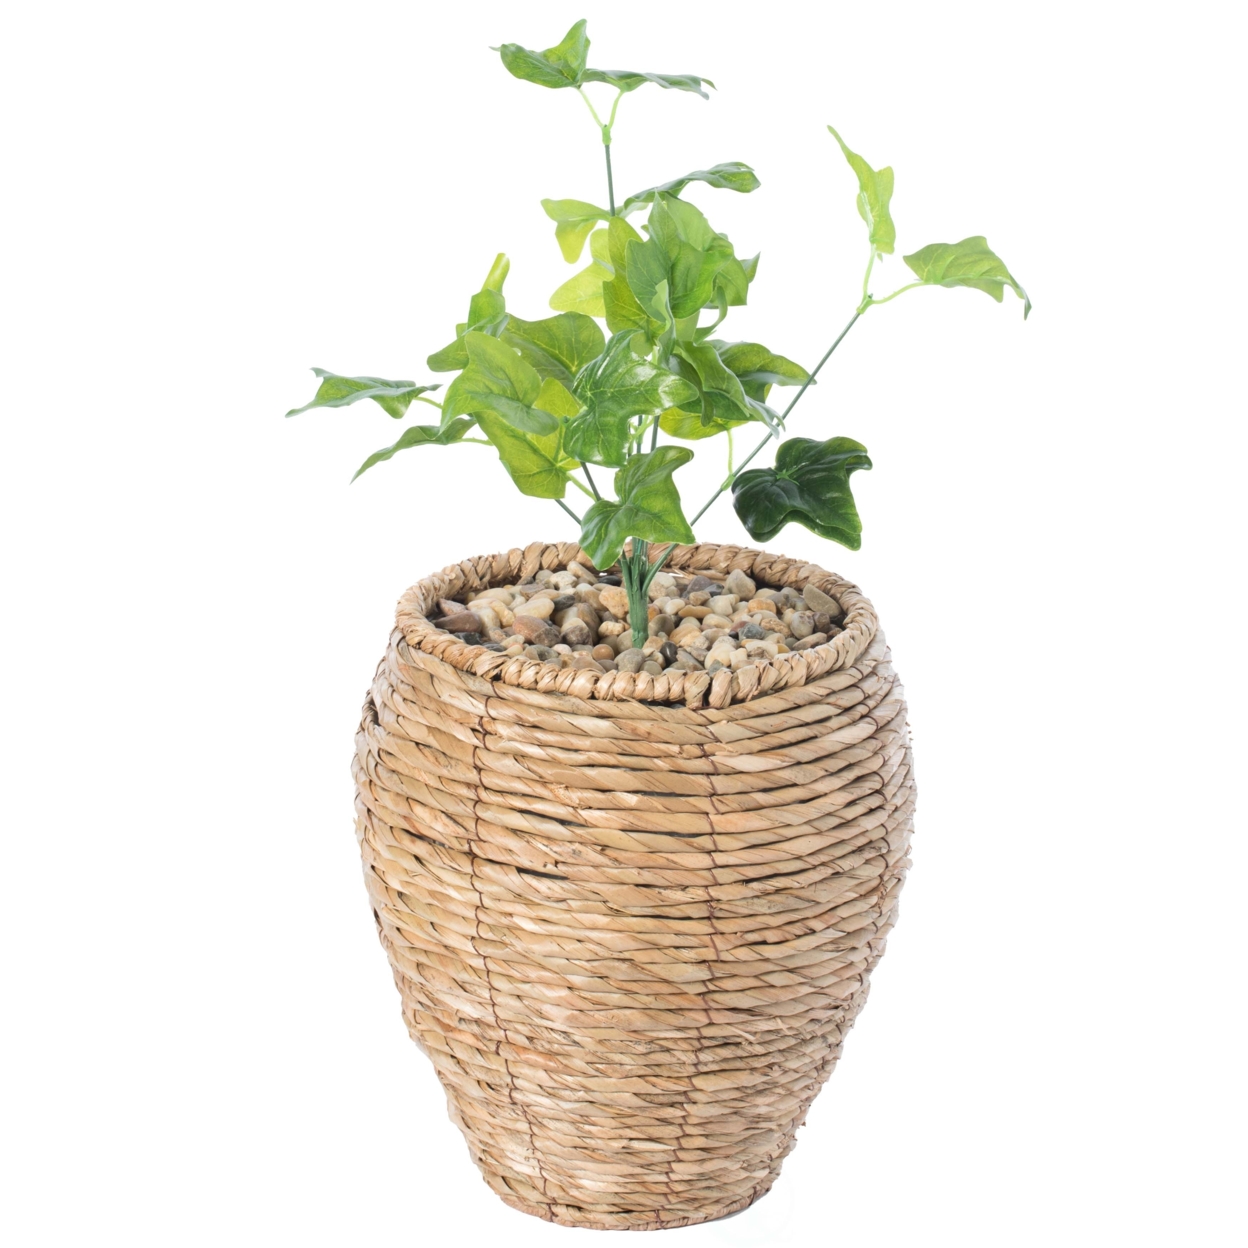 Woven Round Flower Pot Planter Basket With Leak-Proof Plastic Lining - Small